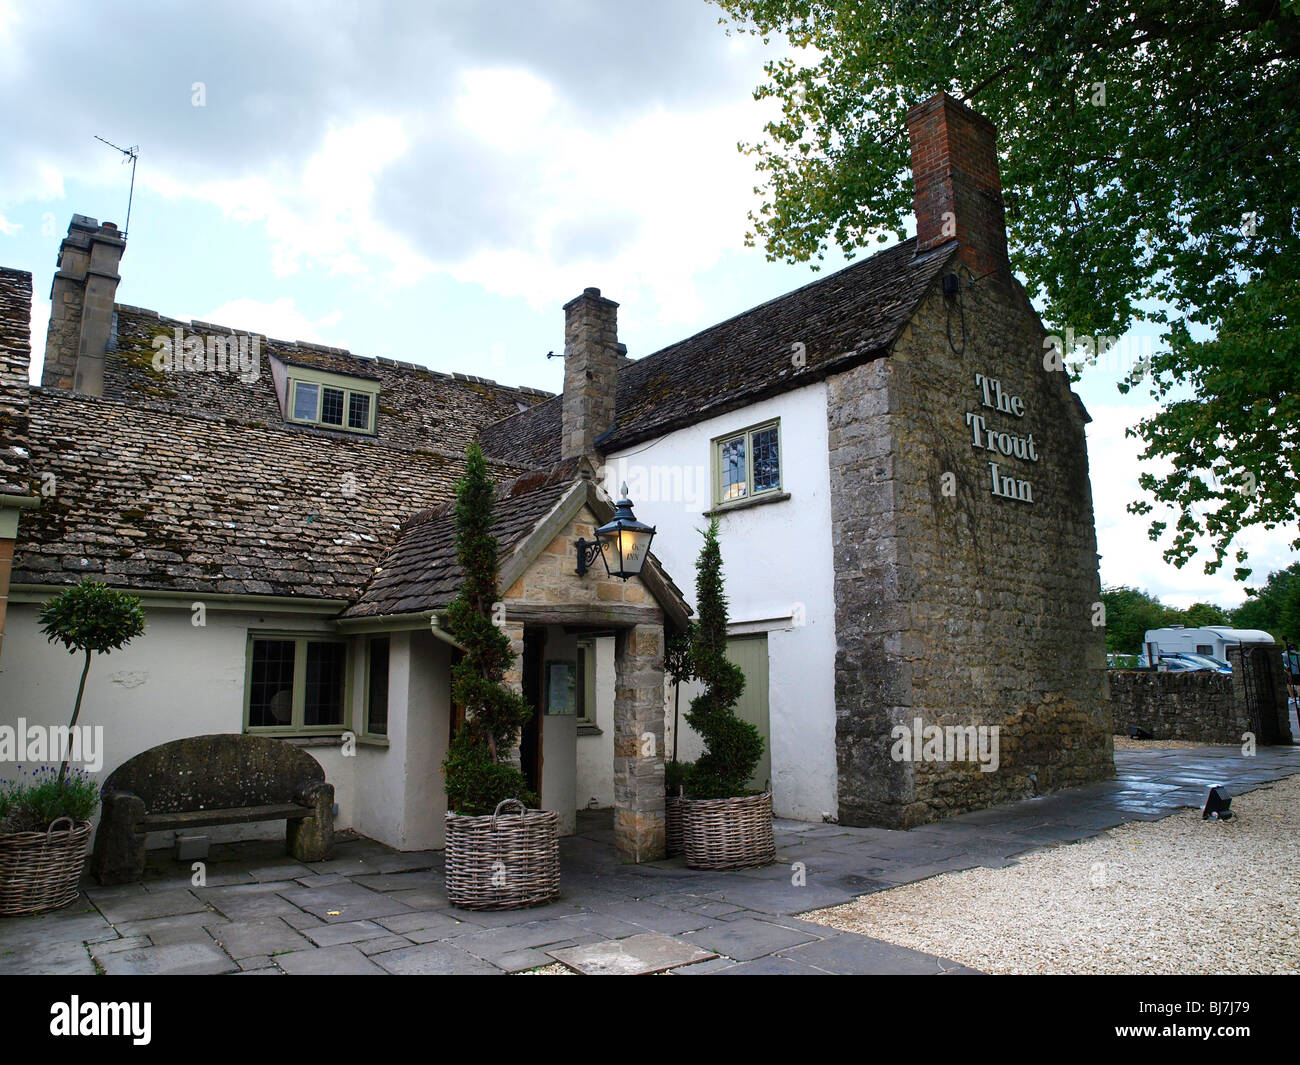 The Trout Inn Lower Wolvercote, Oxford, Stock Photo